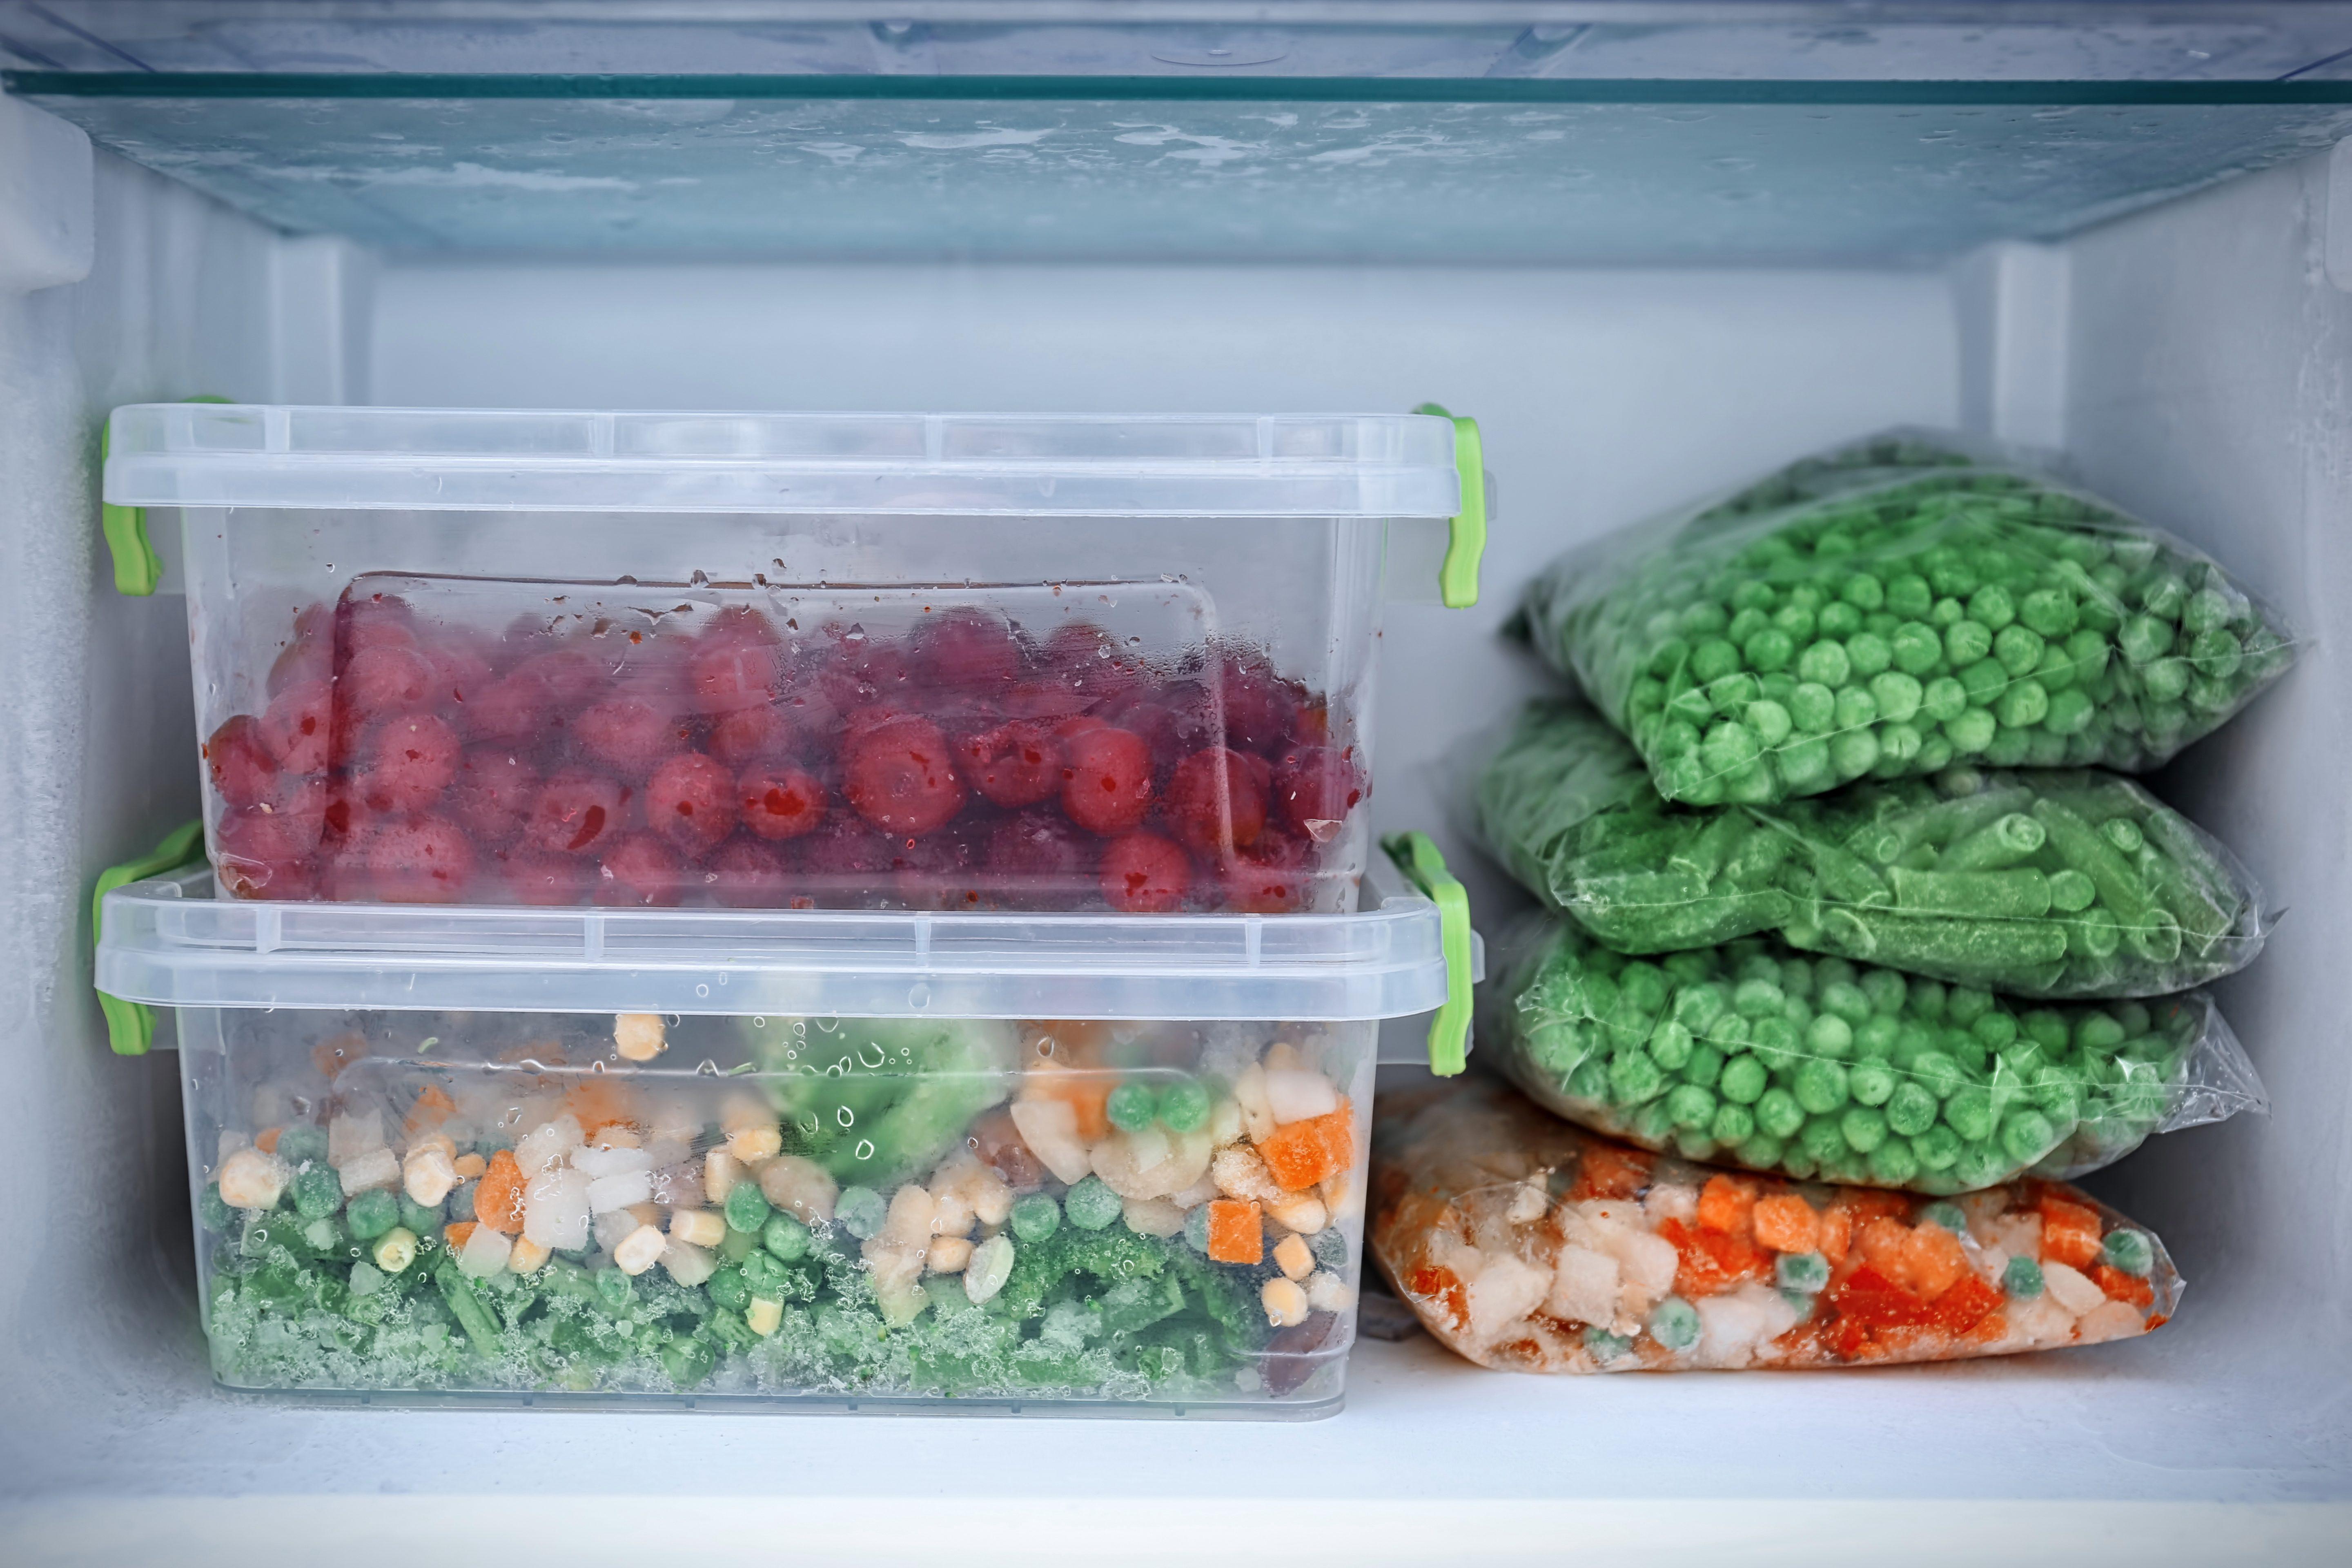 How To Protect Your Food From Freezer Burn